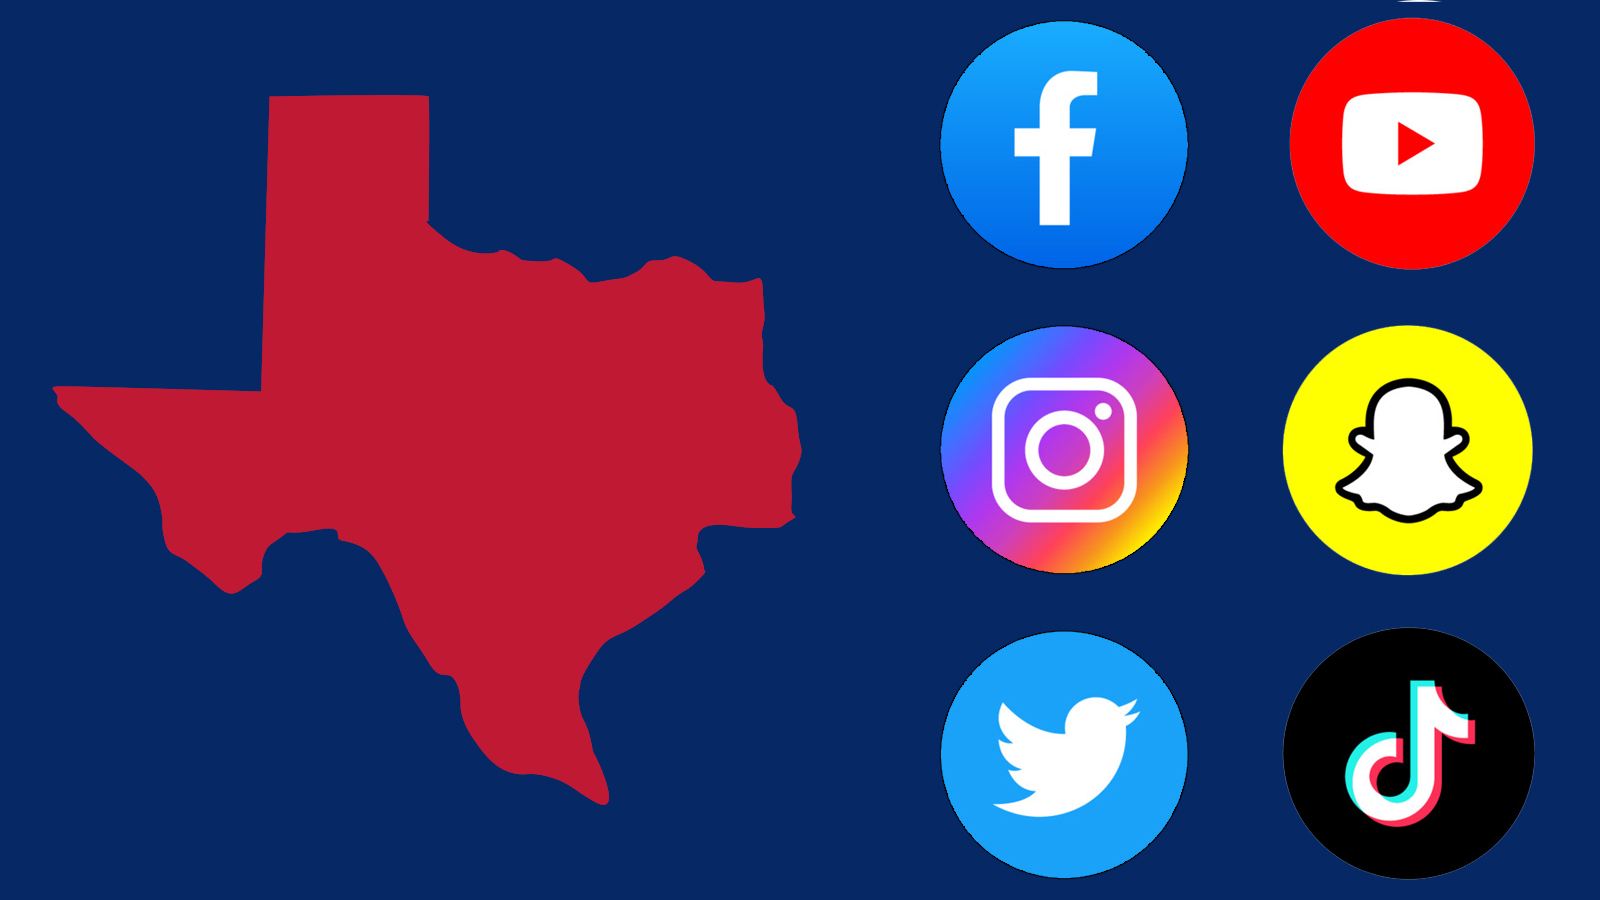 Graphic of the state of Texas outline with social media icons for Facebook, YouTube, Instagram, Snapchat, Twitter, and TikTok